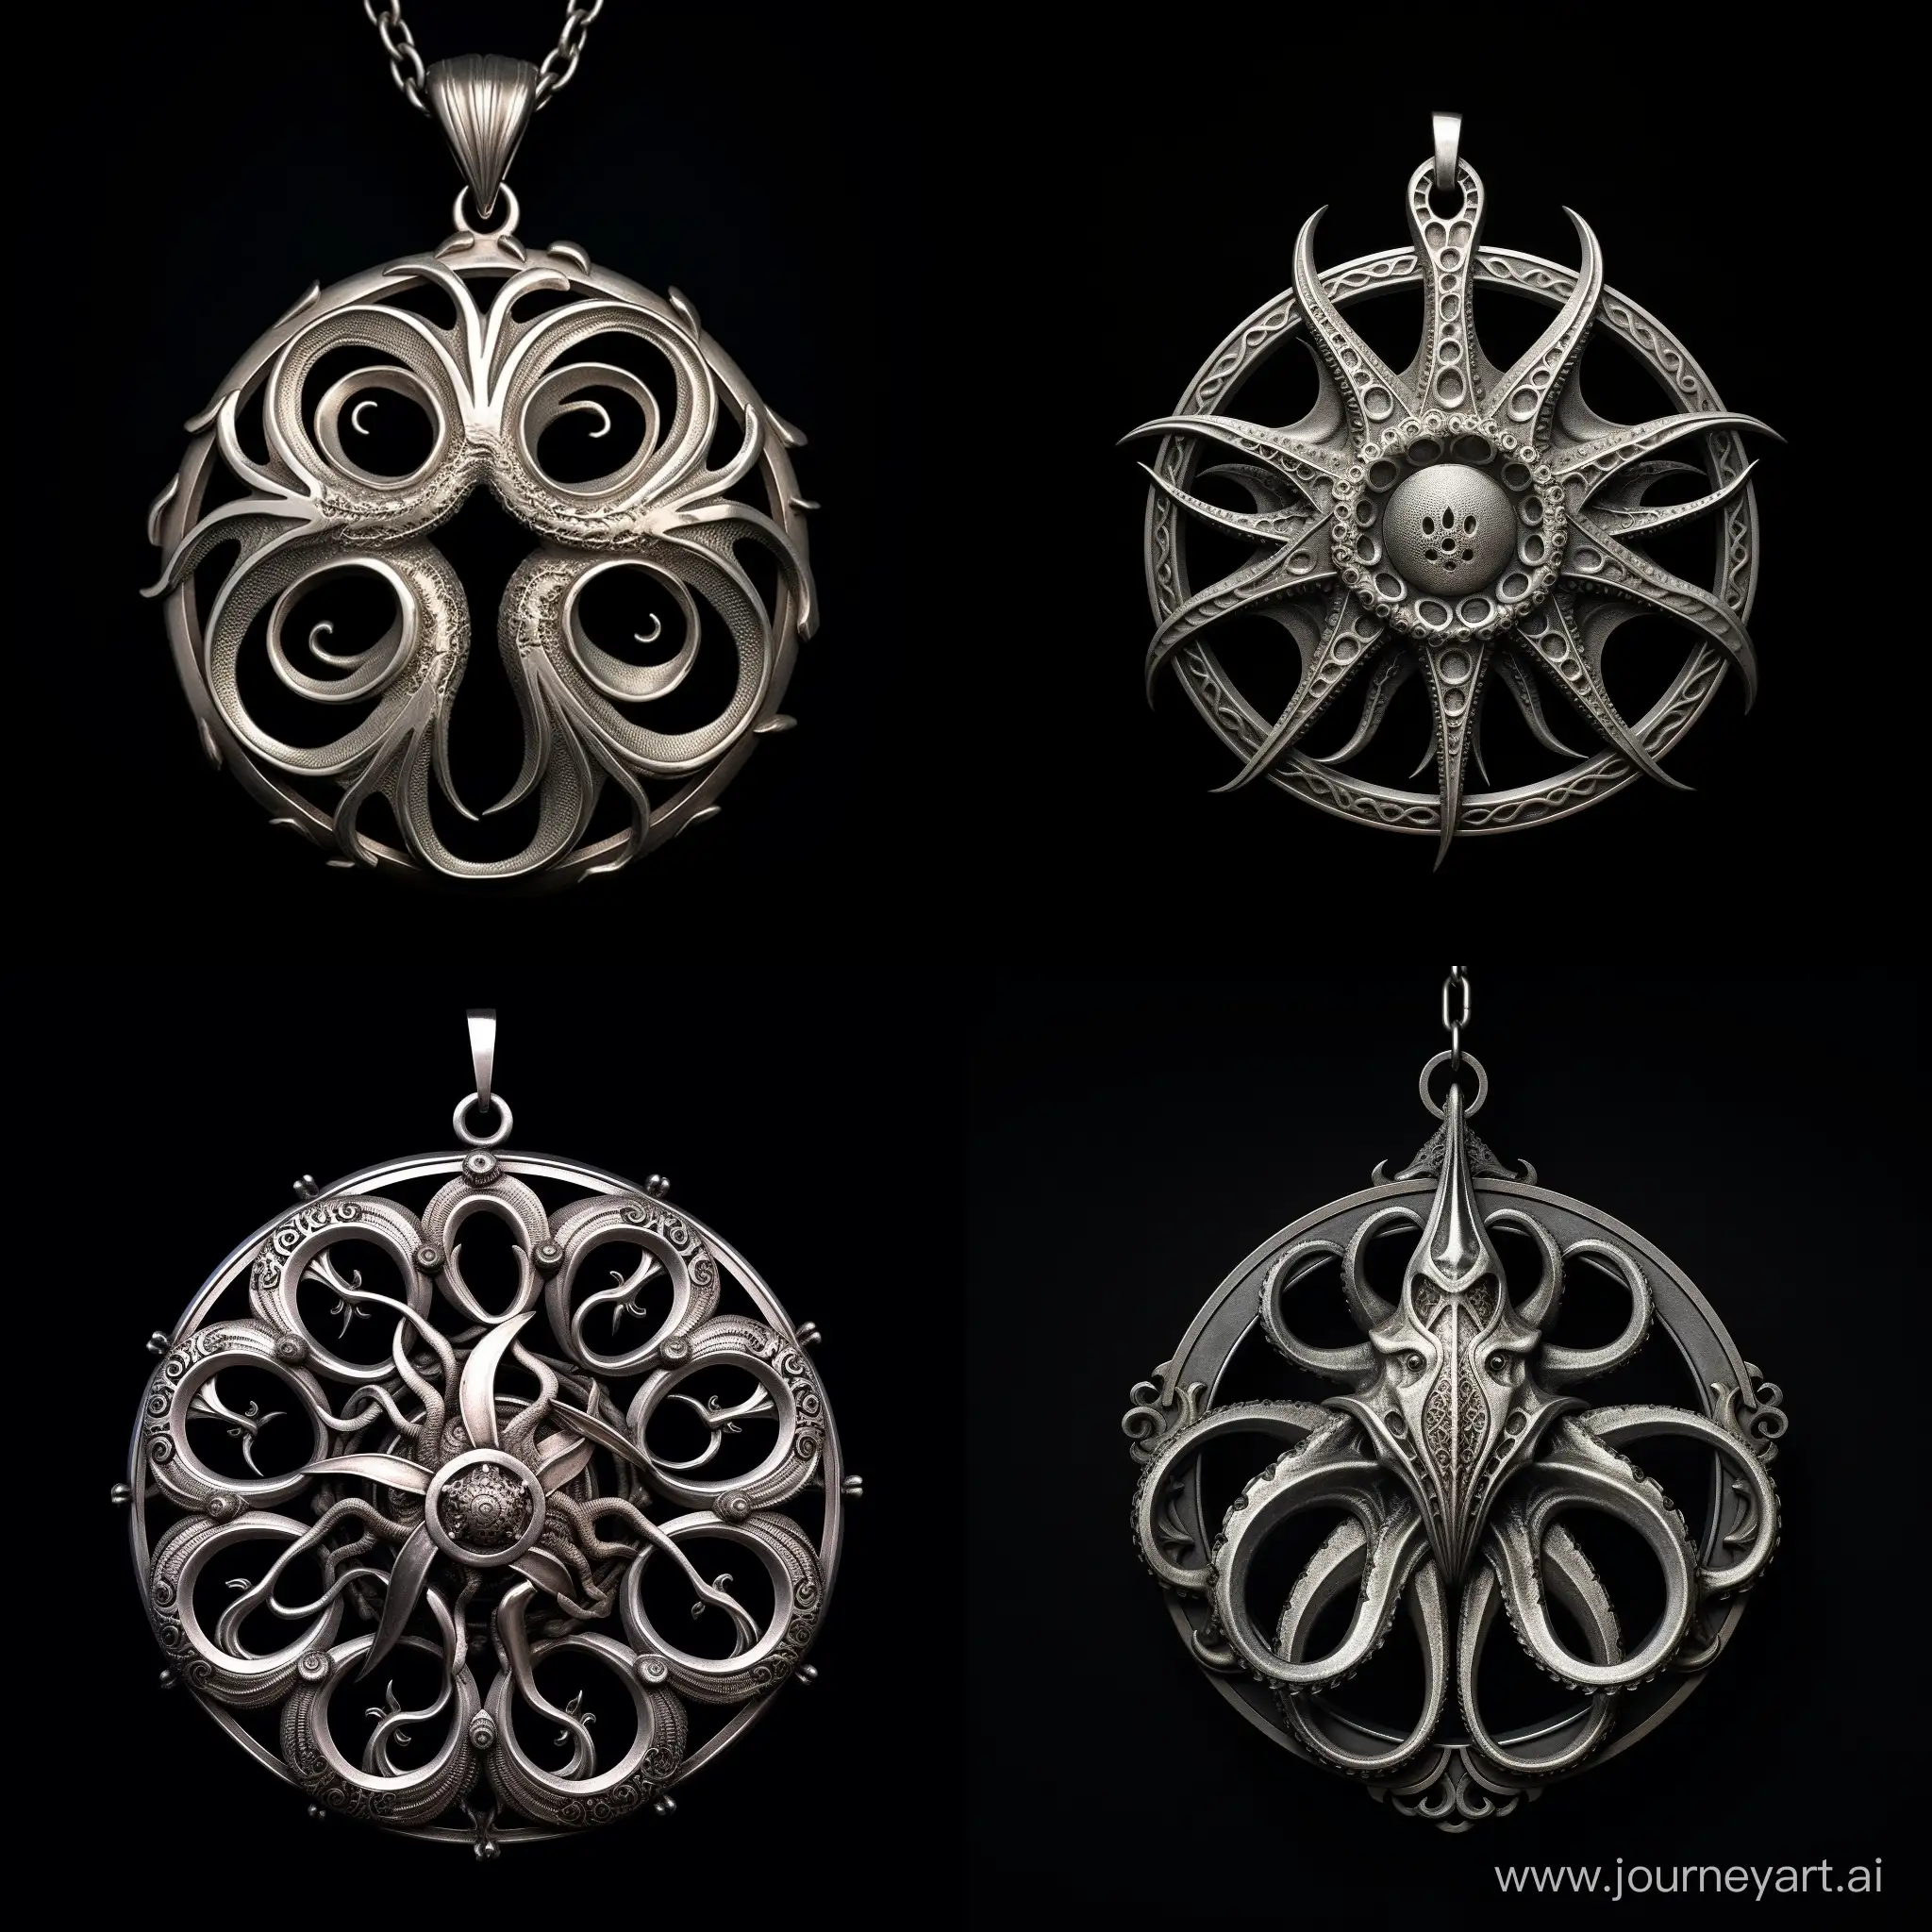 Silver-Wheel-on-Fire-Pendant-with-Octopus-and-Fish-Motif